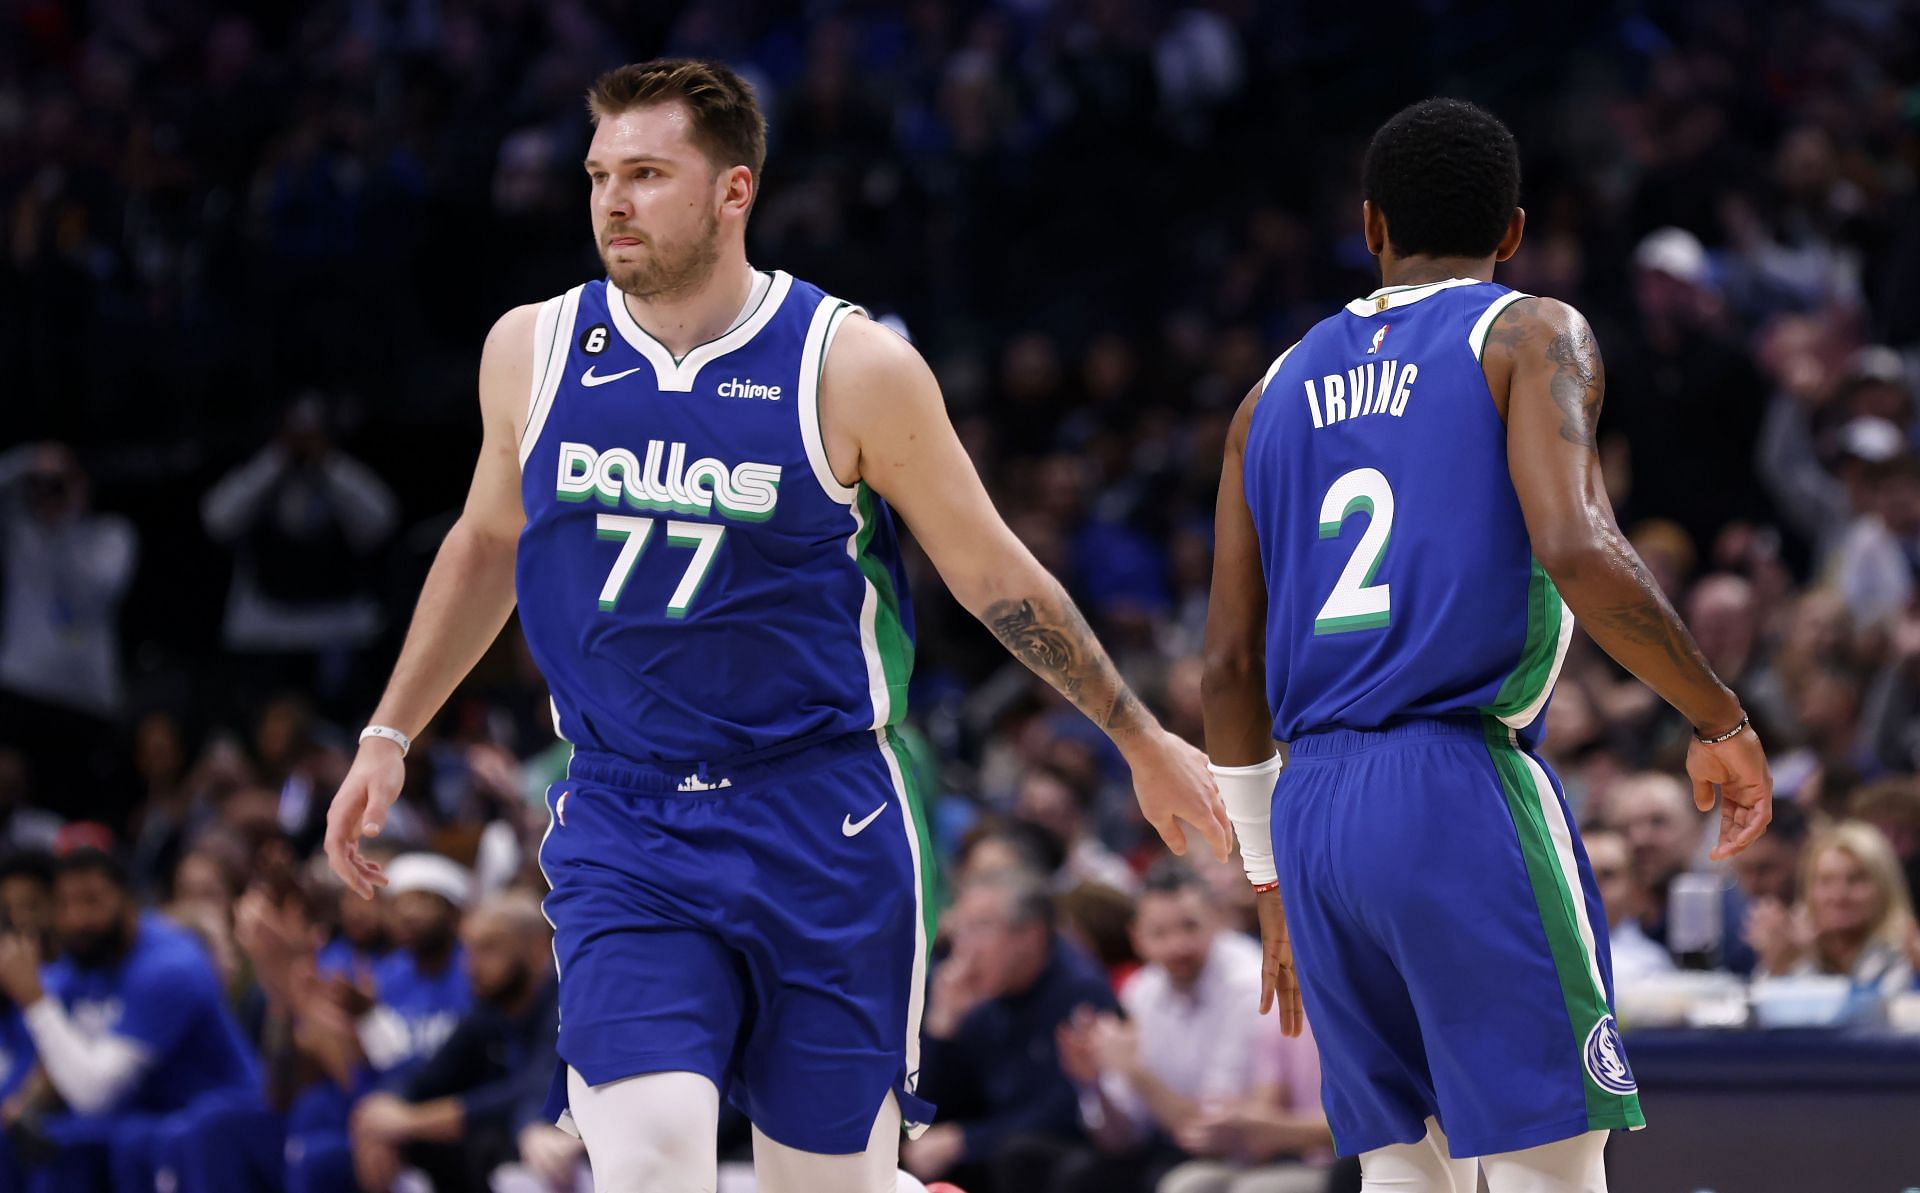 Luka Doncic (left) and Kyrie Irving of the Dallas Mavericks